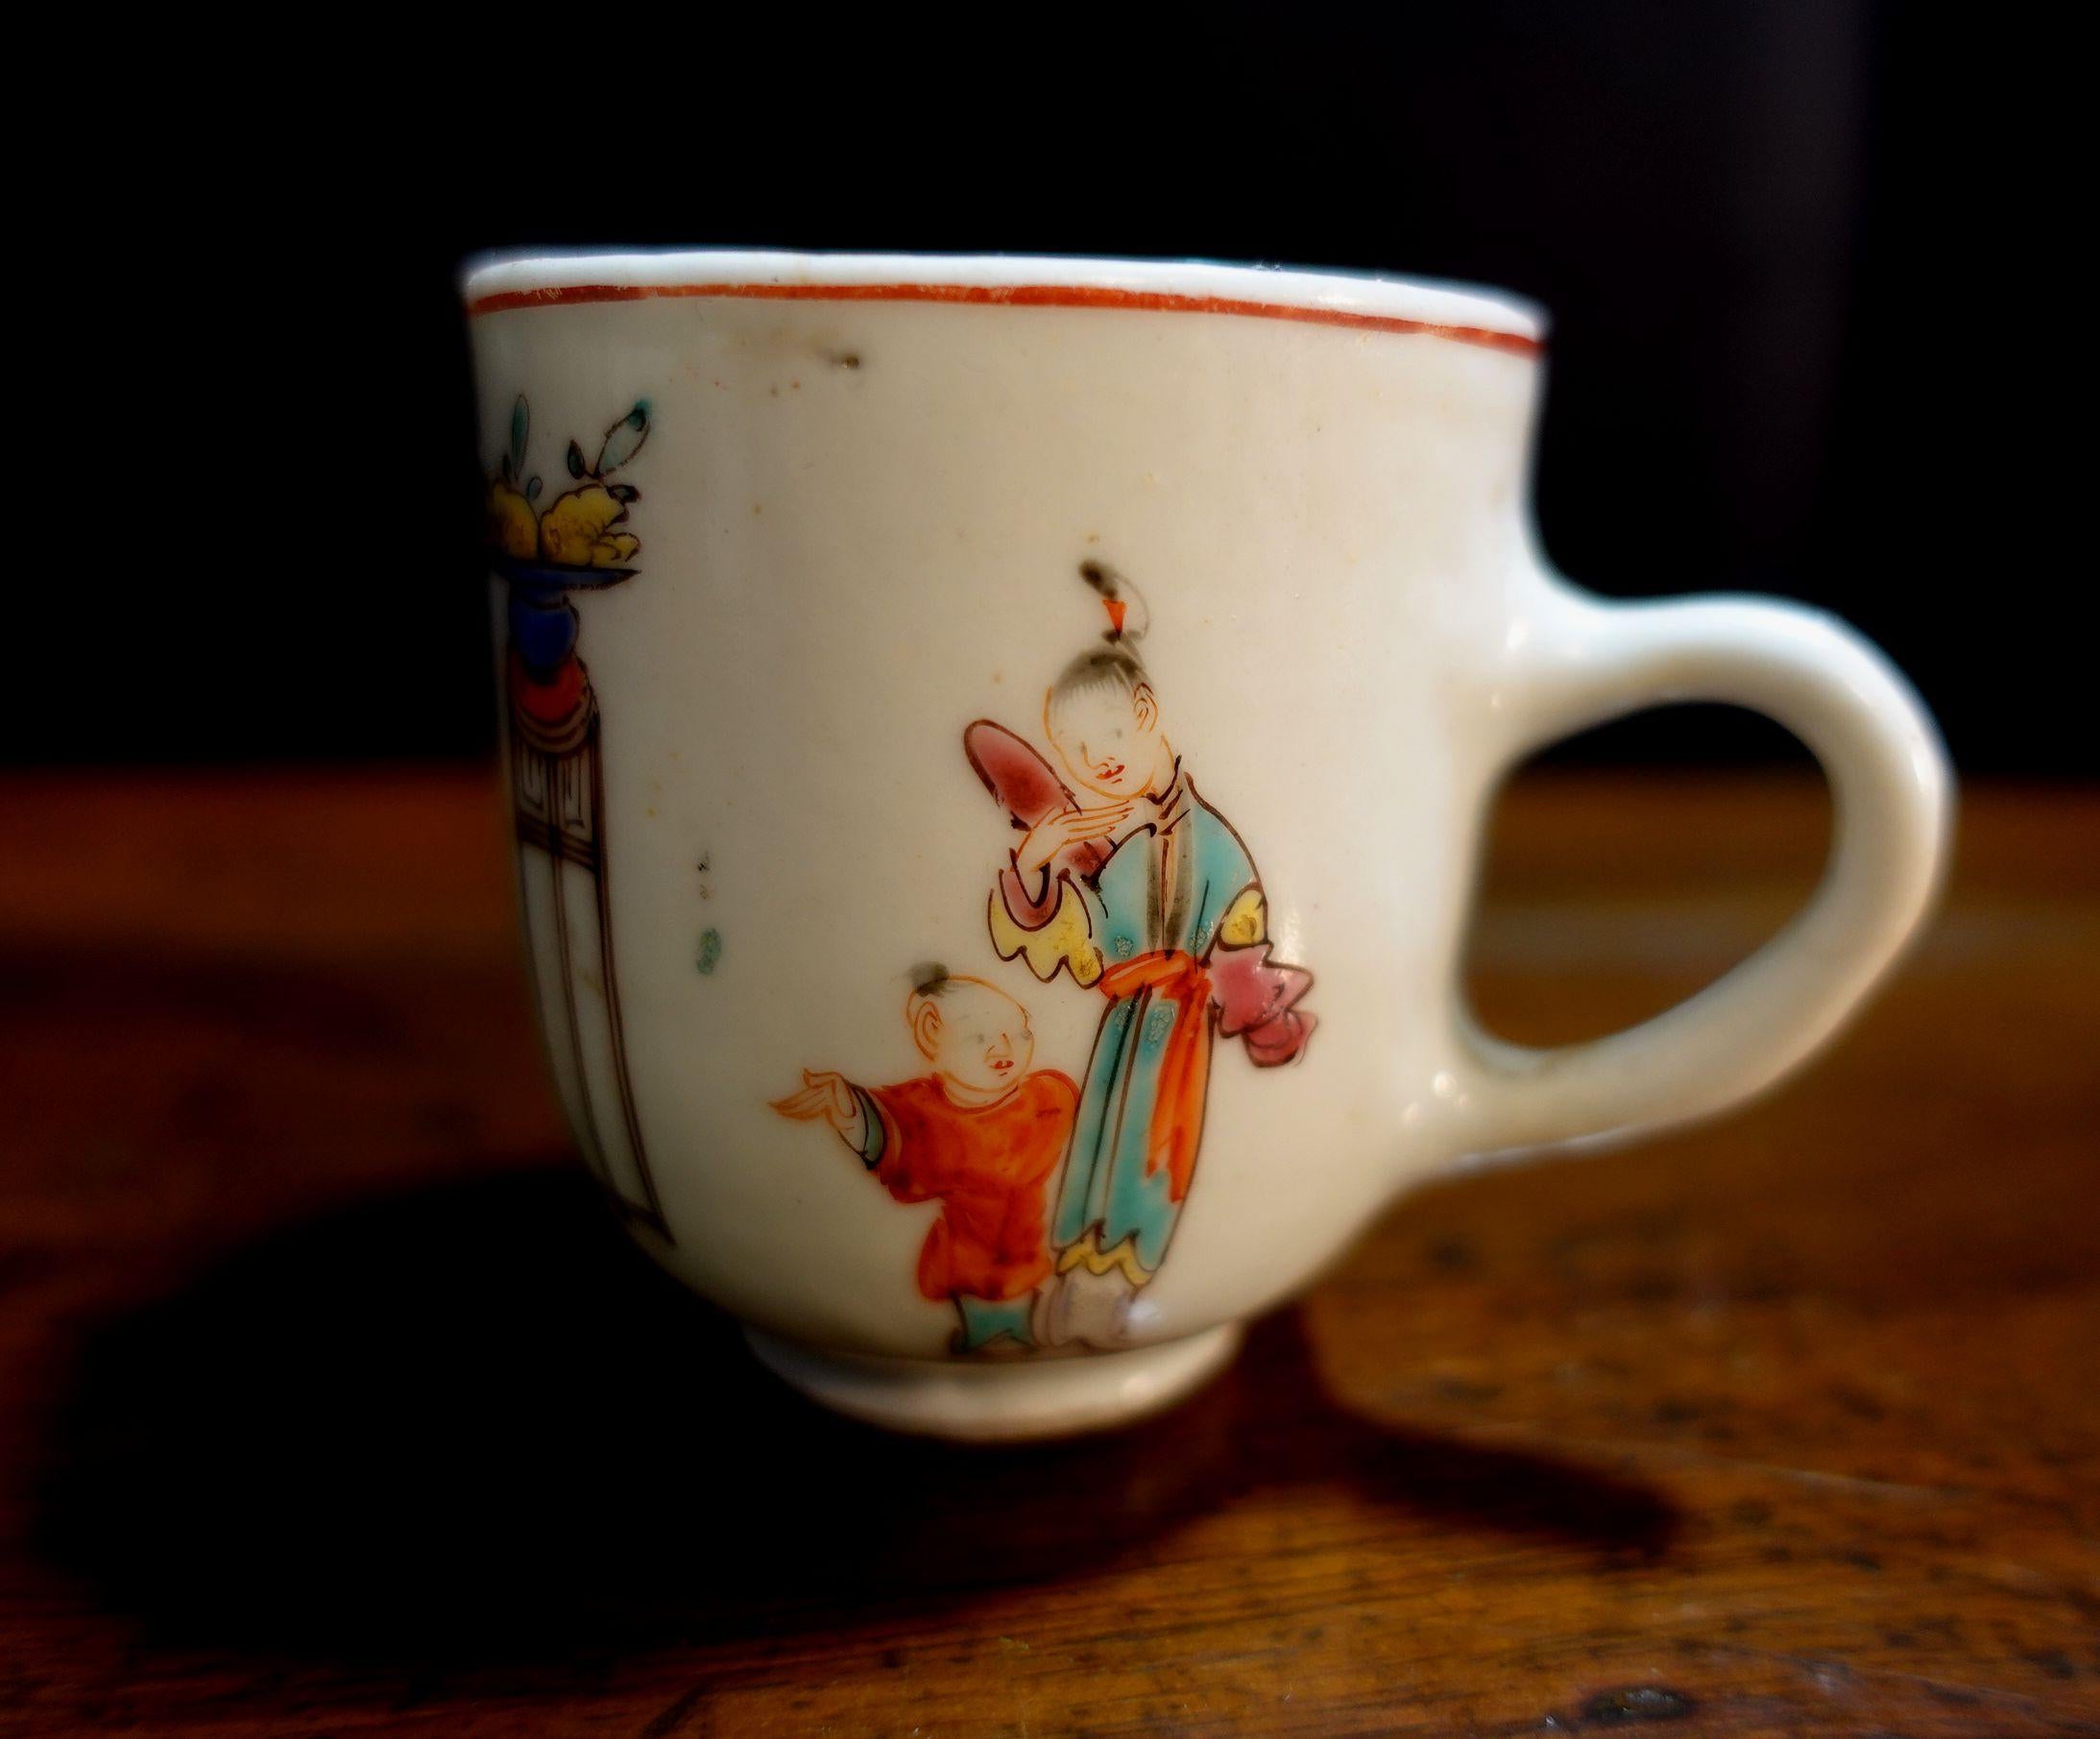 Antique cup from 18th Century China. A supper and rear antique from the Qianglong period.
Height is 2 1/2